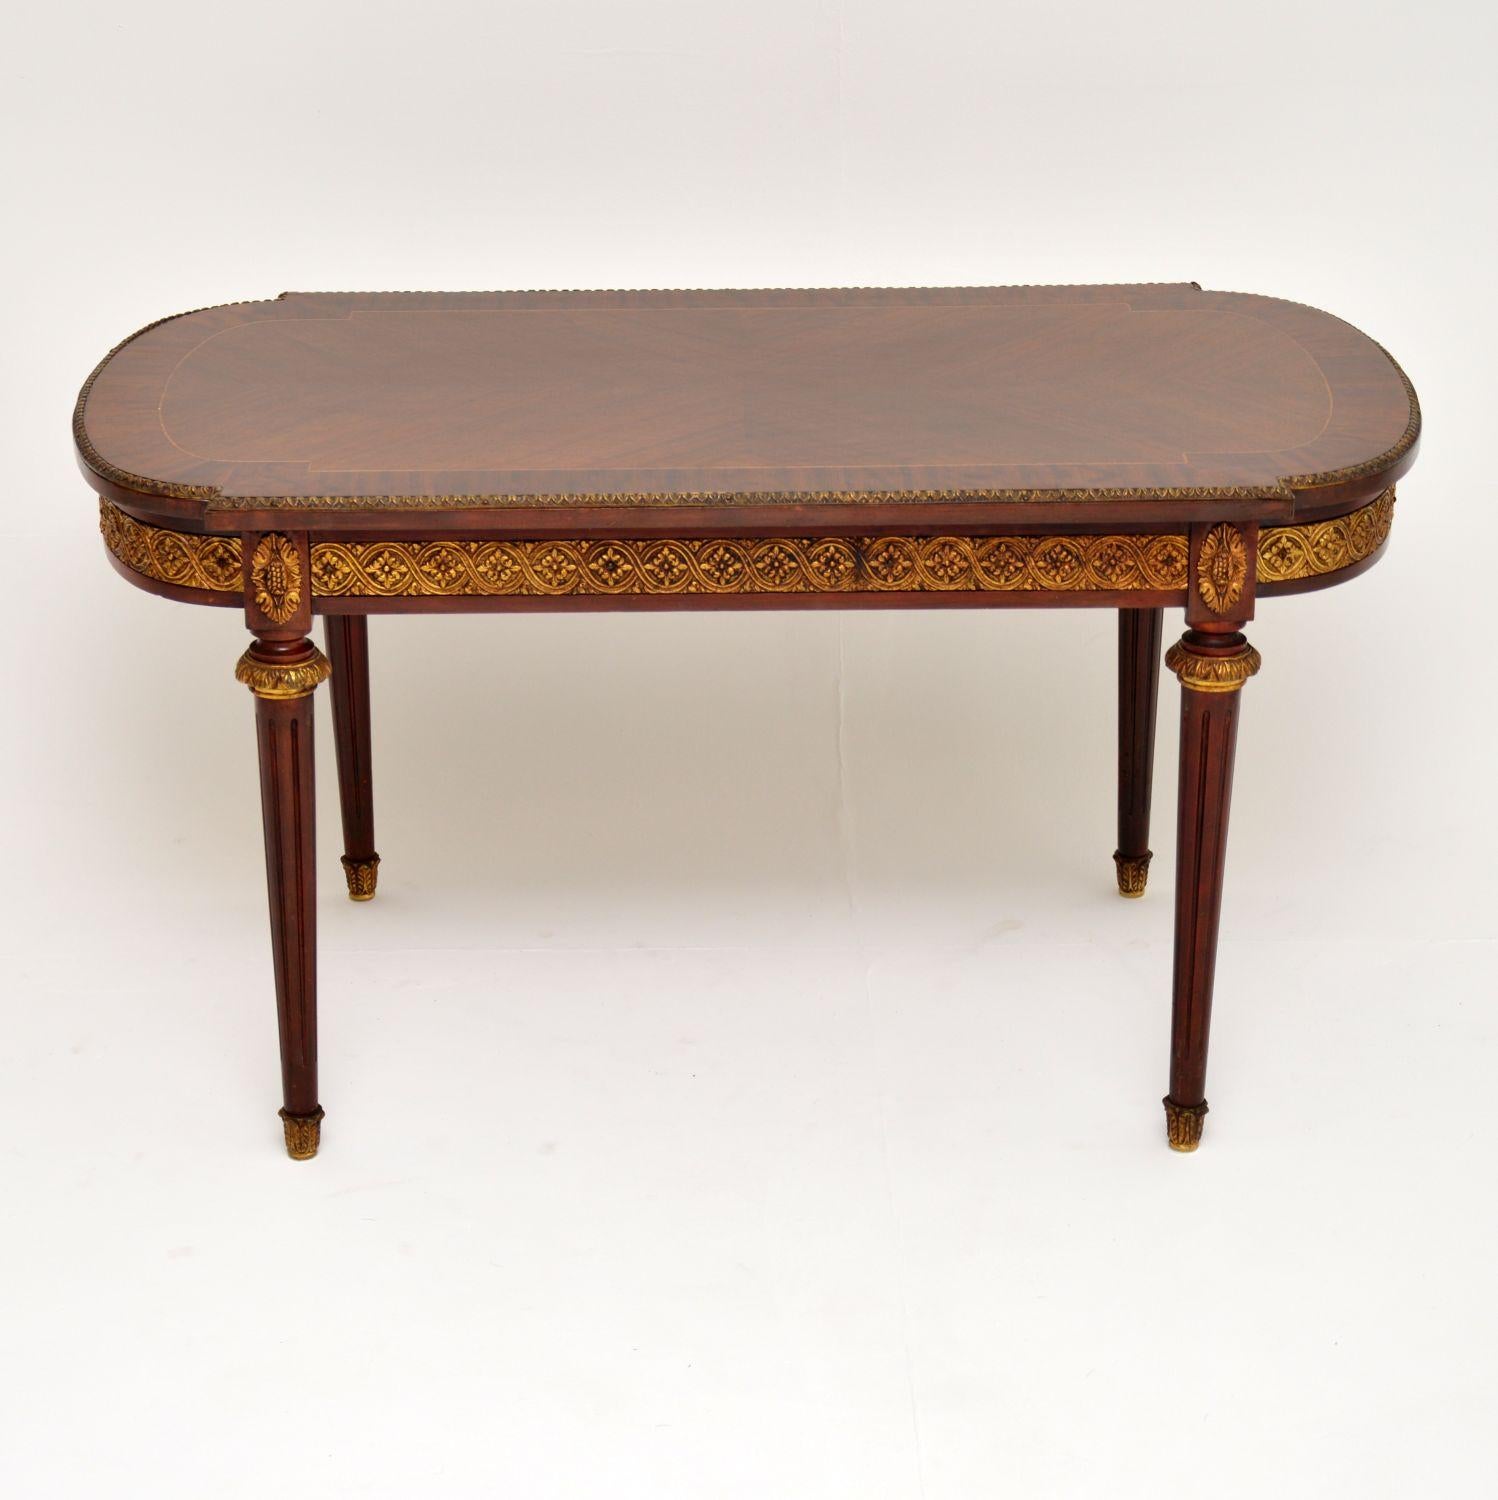 Antique French style mahogany and kingwood coffee table in very good original condition and dating from circa 1930s period.

It has a kingwood top bordered with satinwood inlay and mahogany cross banding. There is a gilt bronze top edge and frieze